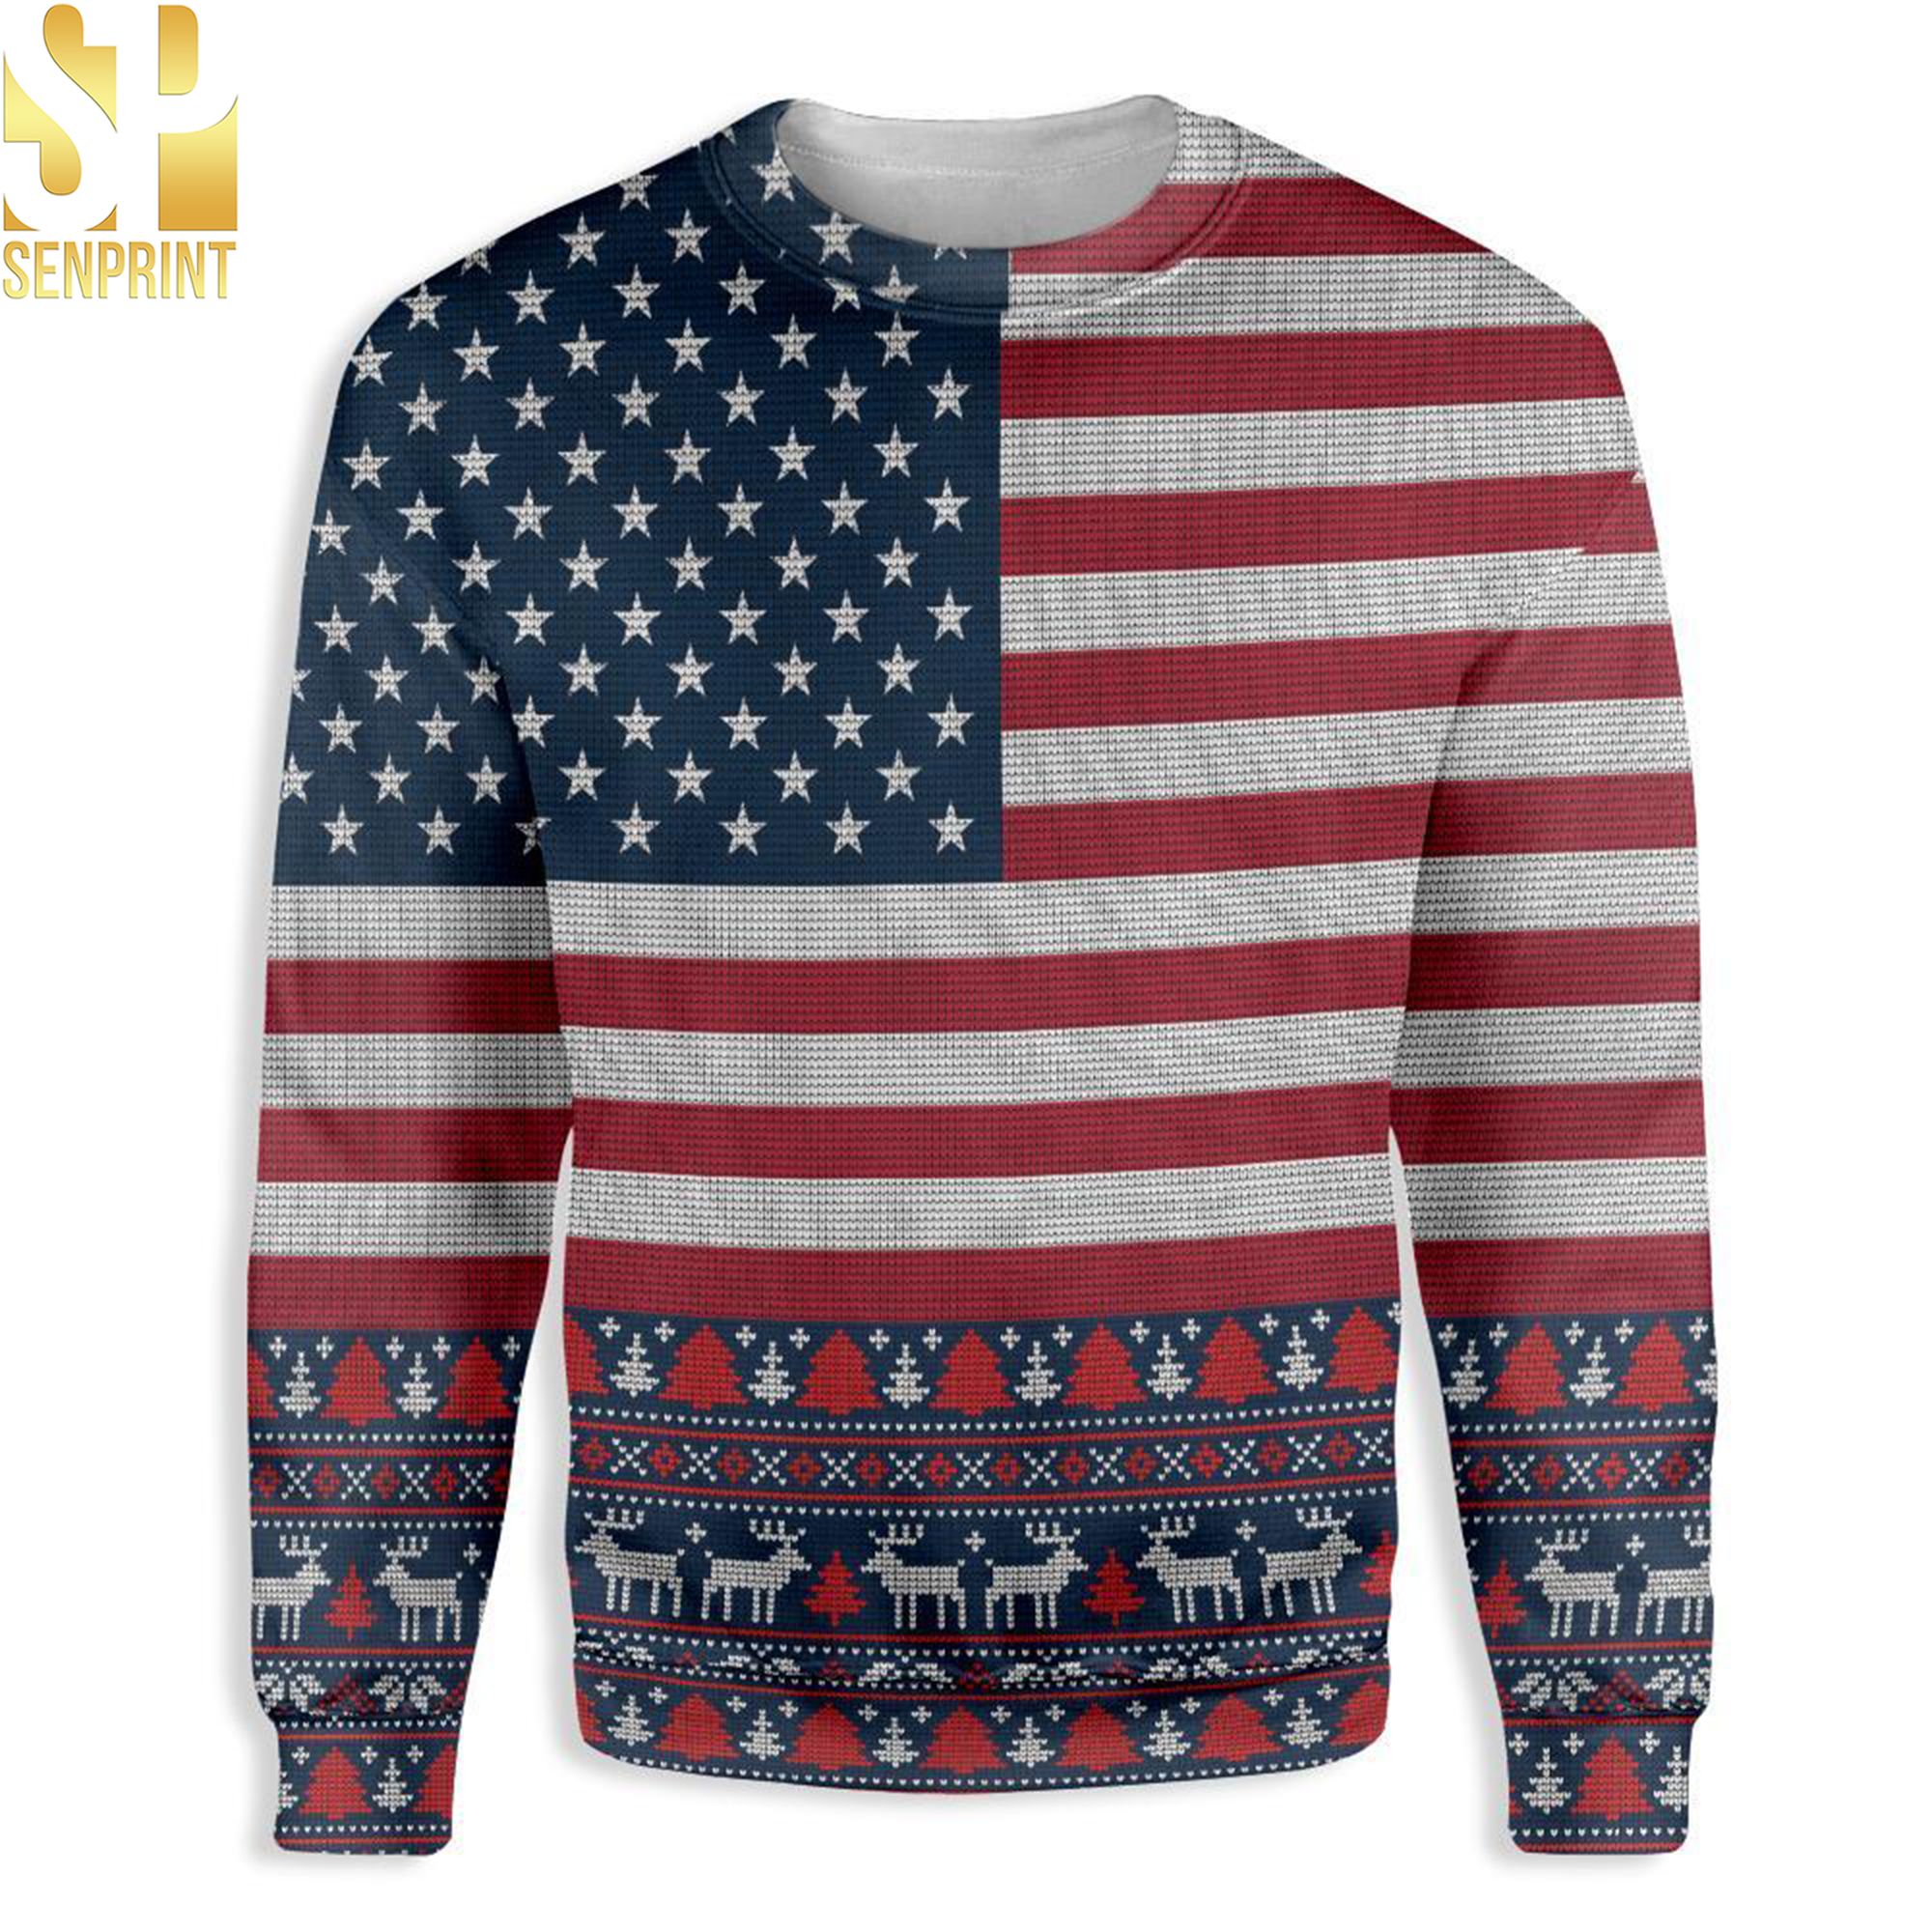 Wear Your Patriotism with Pride The American Flag Sweater